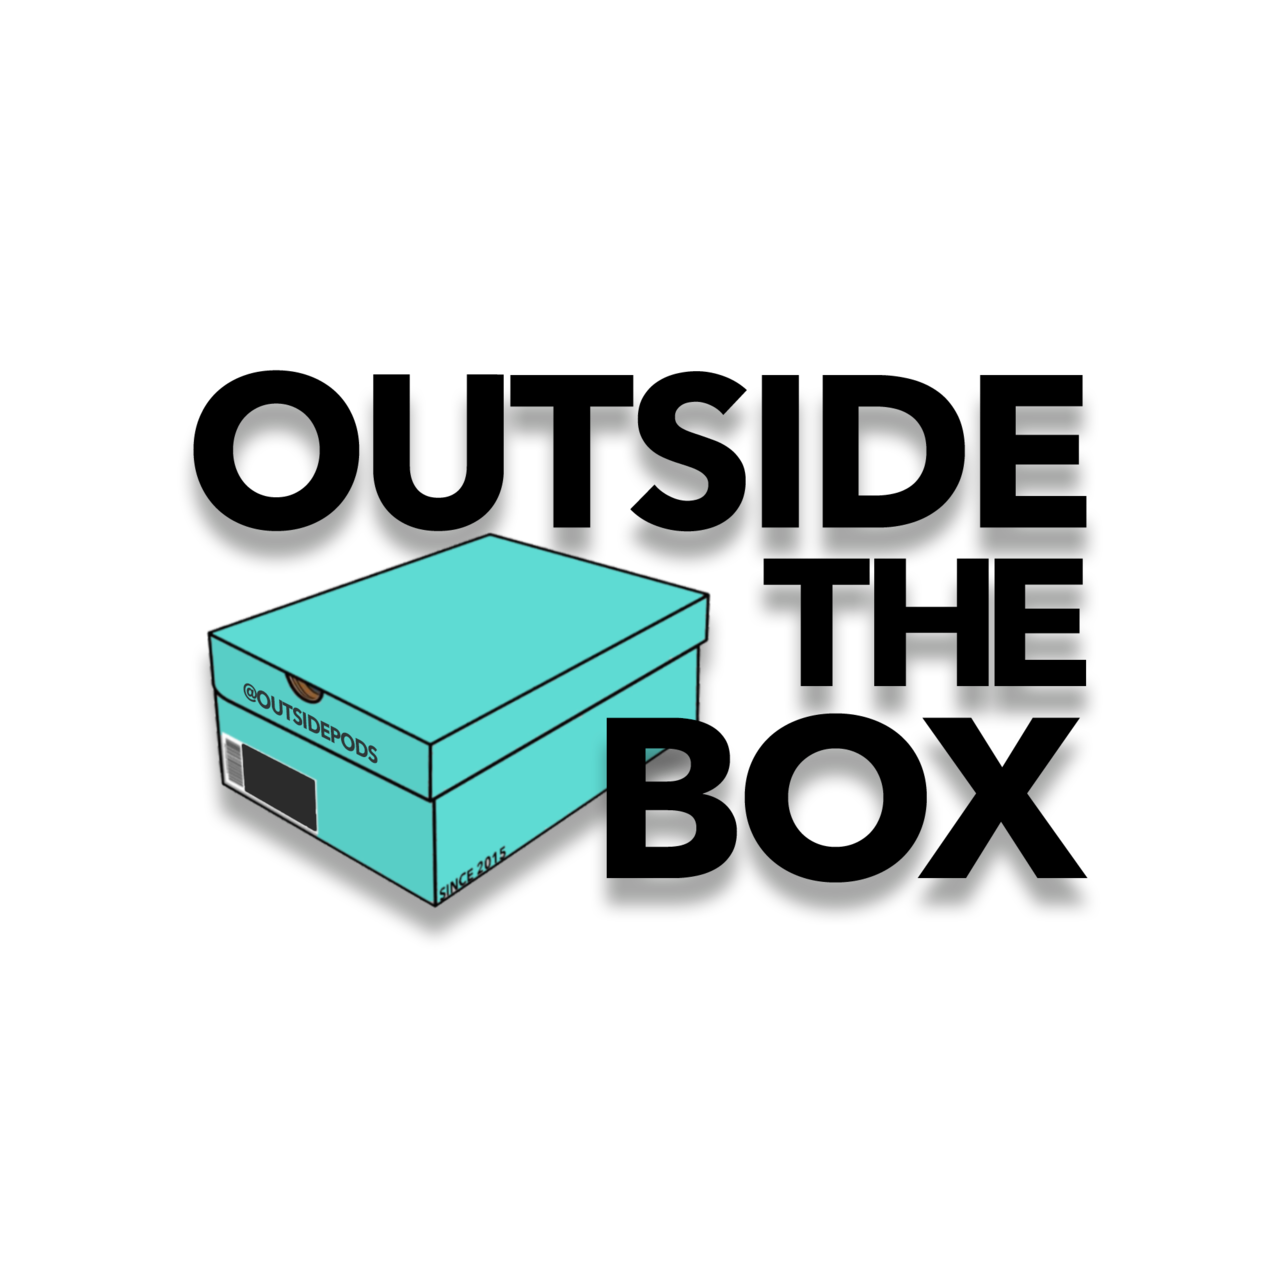 Outside The Box - A Different Way To Think About Sneakers